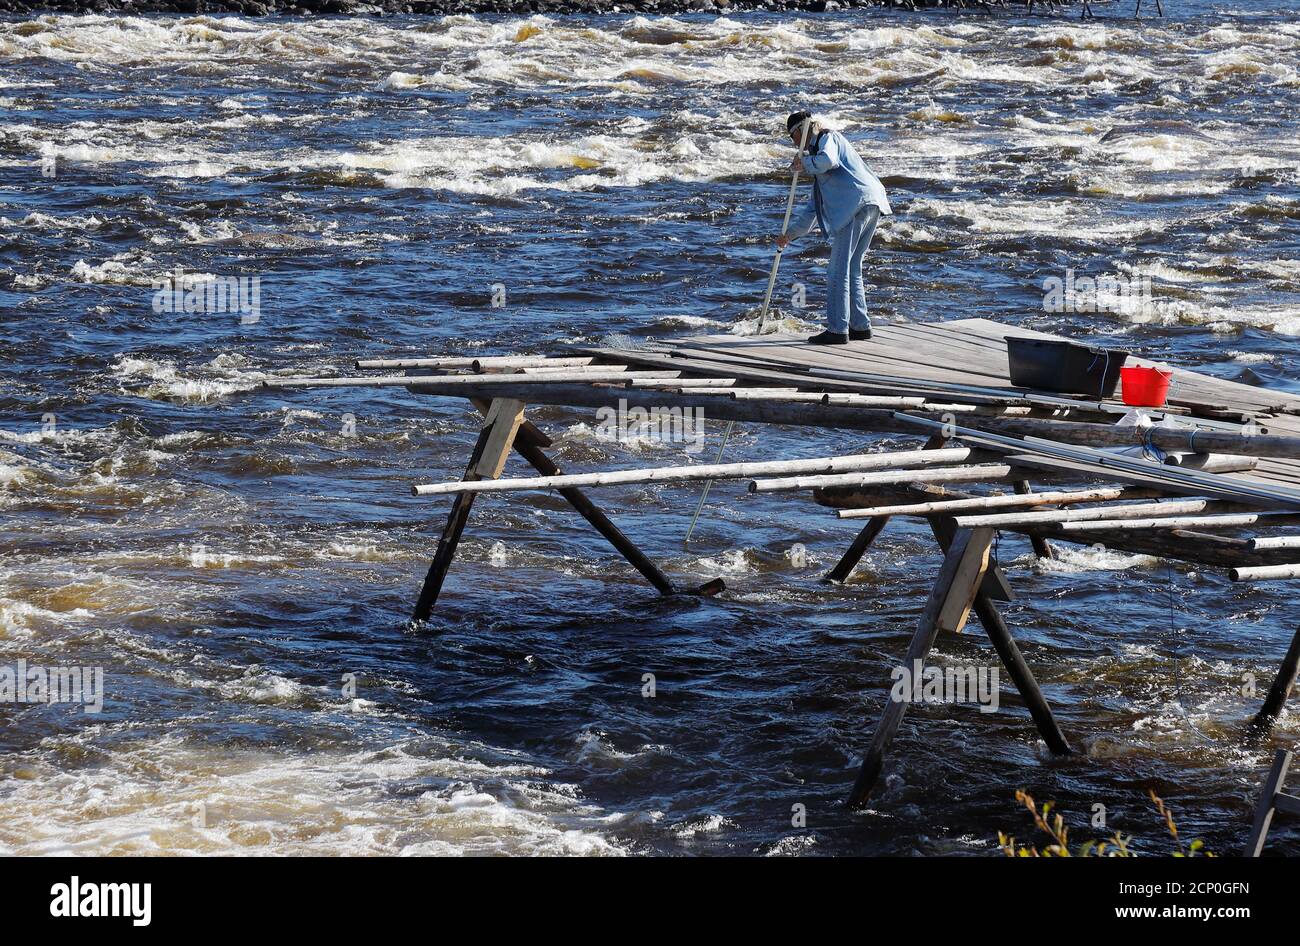 Kukkola, Sweden - August 24, 2020: A man is traditional fishing for lavaret (whitefish) in the Kukkola rapids in the Tornio river. Stock Photo